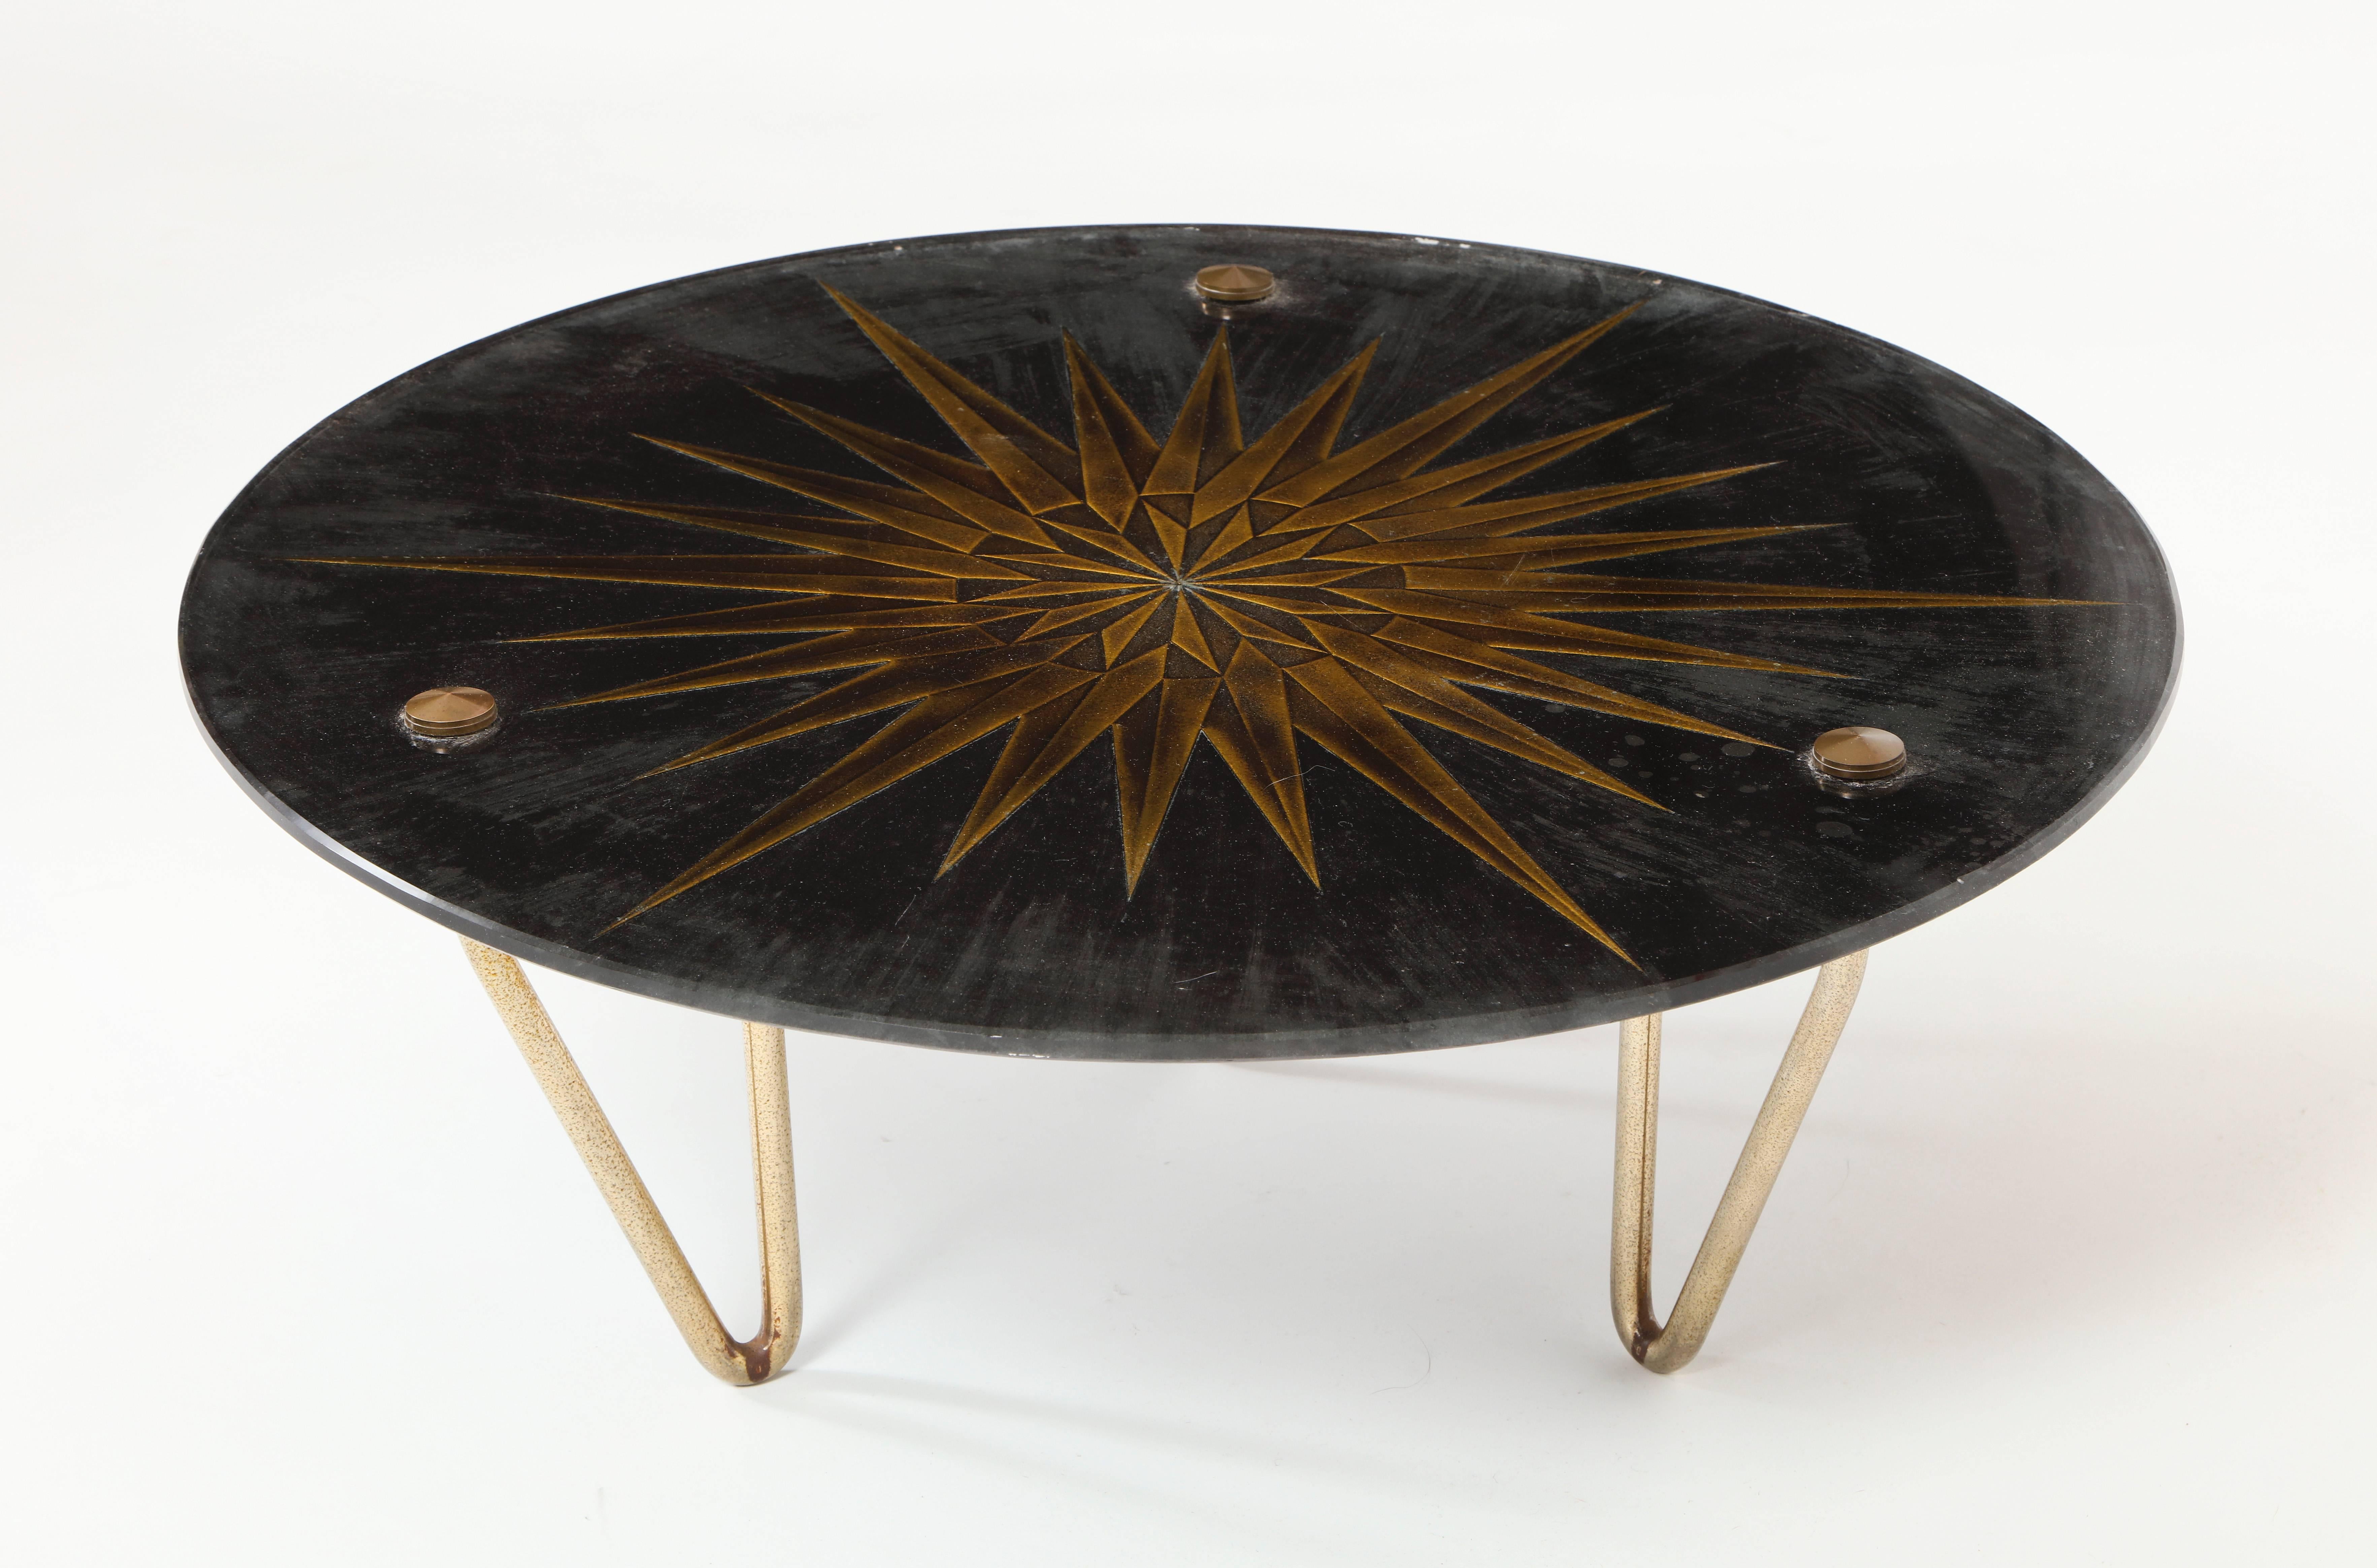 Andre Arbus style etched sun glass bronze tripod table Deco, midcentury, 1950, France
This is a beautiful and rare etched glass tripod table.
Would have been used as a center table.
It stands on bronze legs.
The workmanship is incredible,